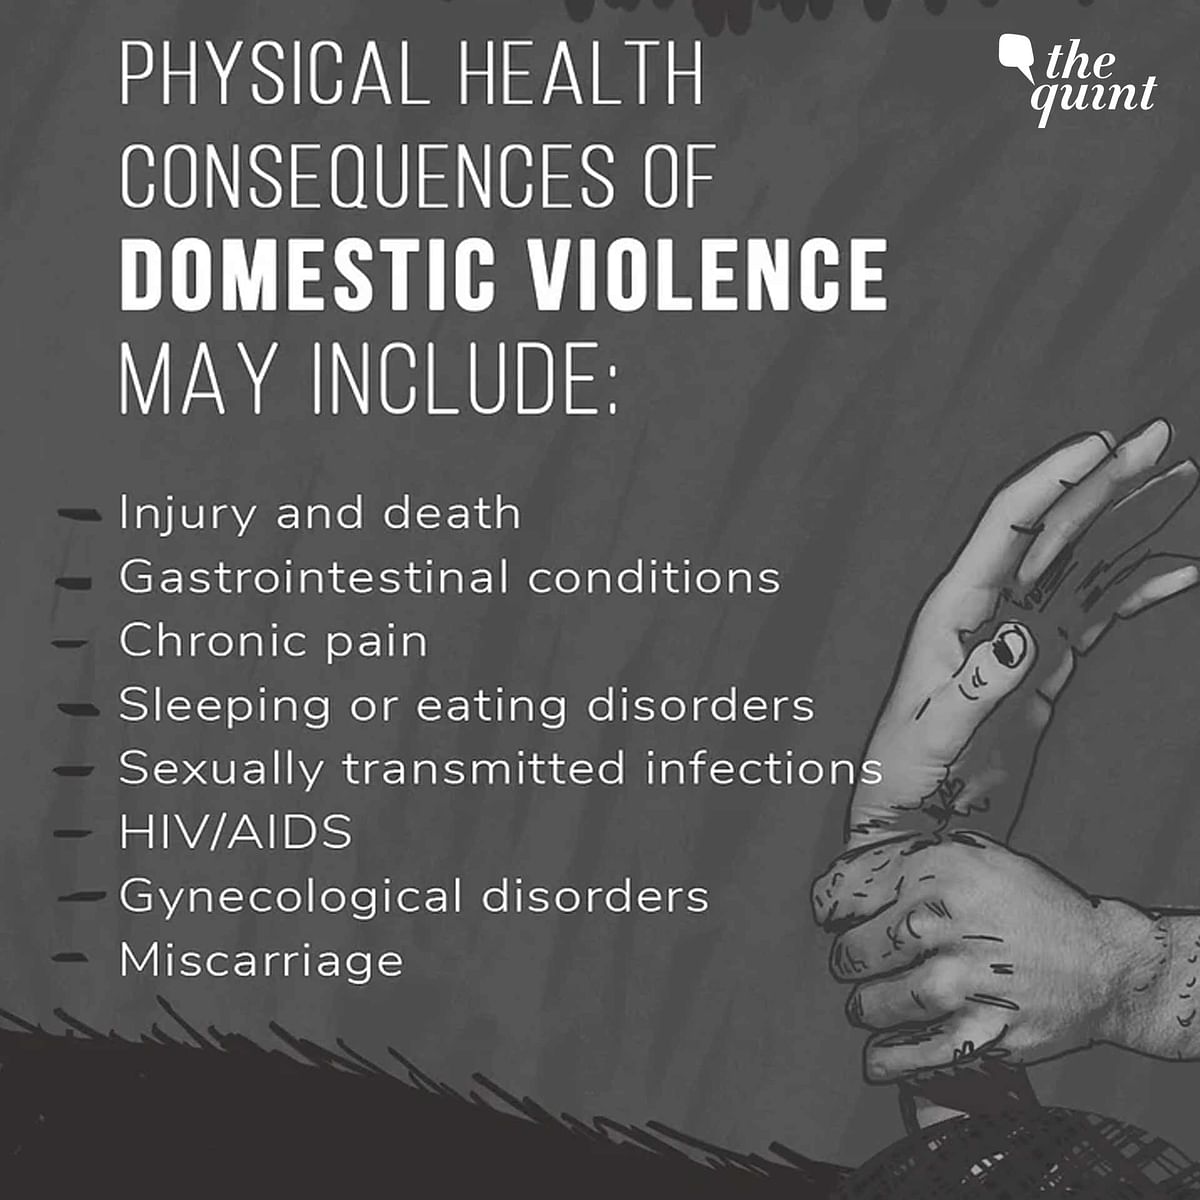 Only 14 percent of women who have experienced domestic violence by anyone have sought help to stop it.